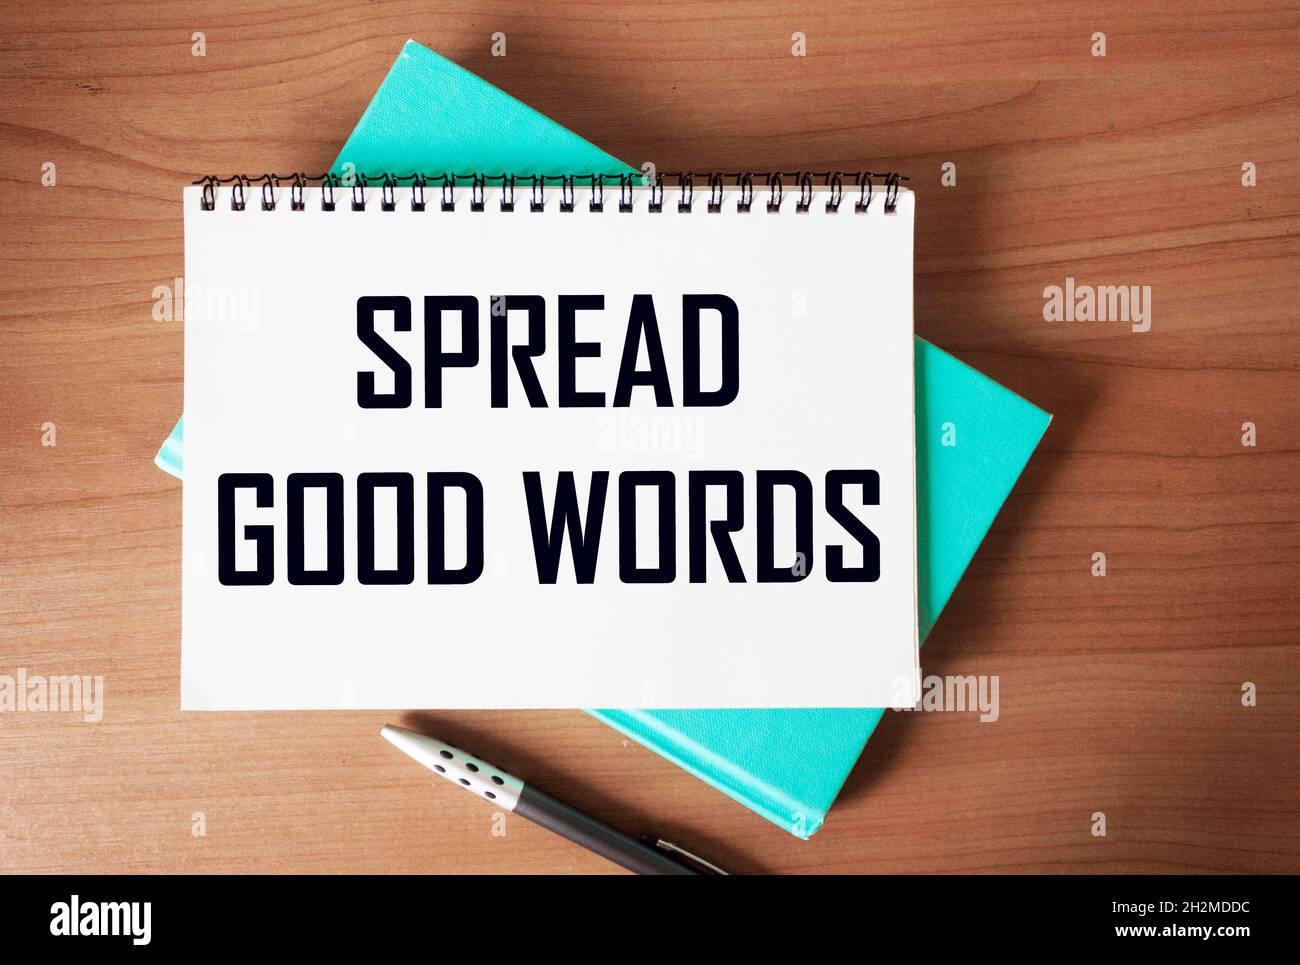 the text SPREAD GOOD WORDS is written on a notebook and on a wooden table . Stock Photo